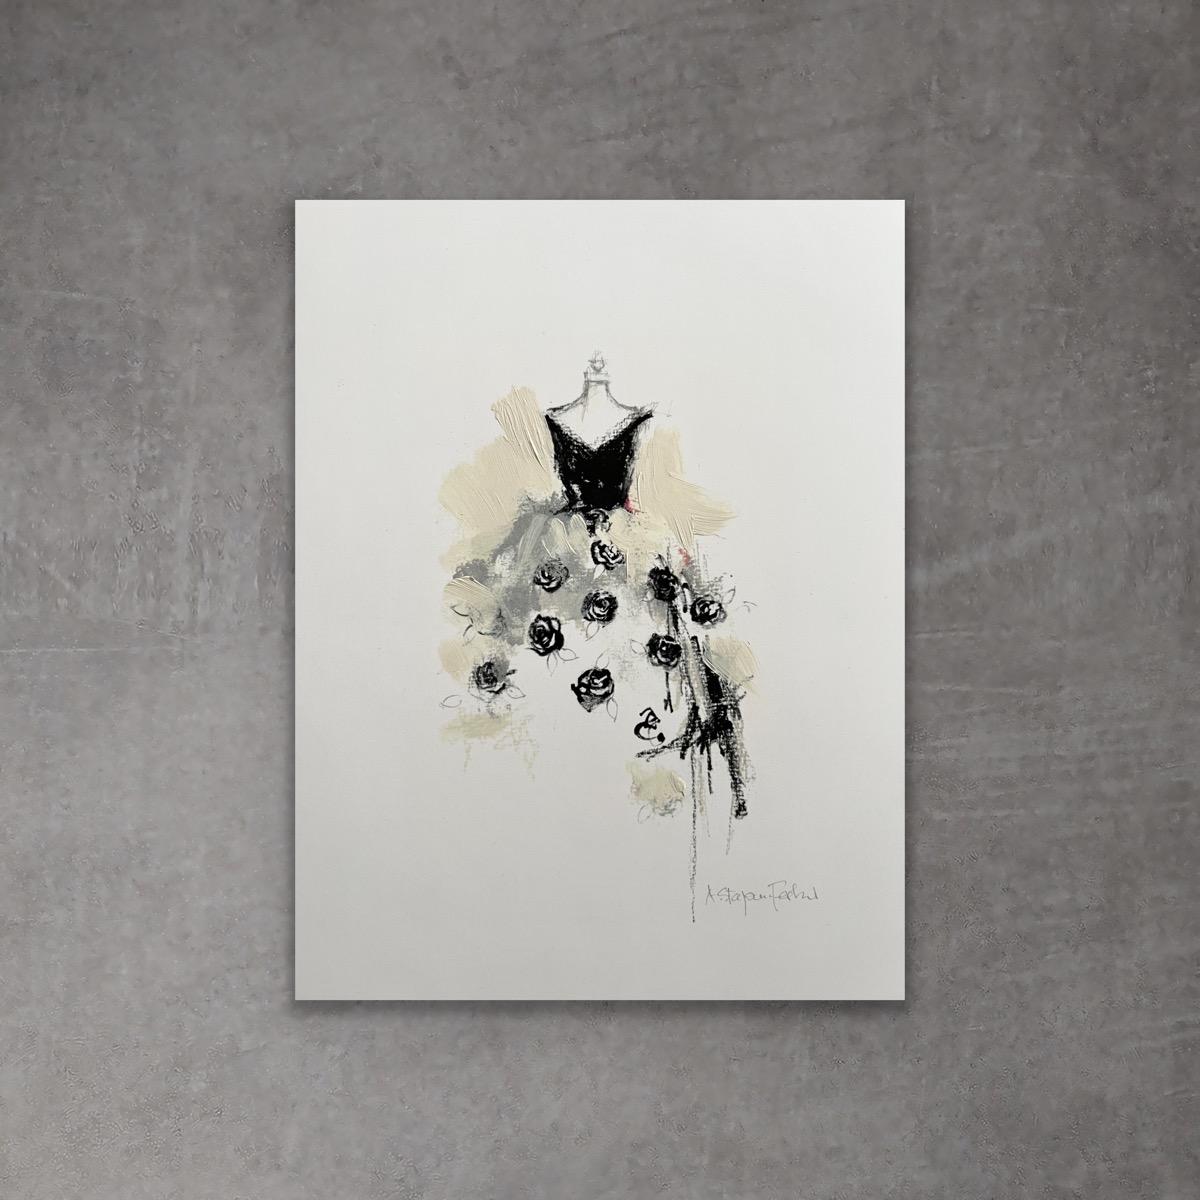 A timeless palette of neutrals. This art print has hand painted brush and pencil strokes added to give it a unique quality. This fusion of digital and hand painted elements add distinct character and individuality. Enhance your space by adding a